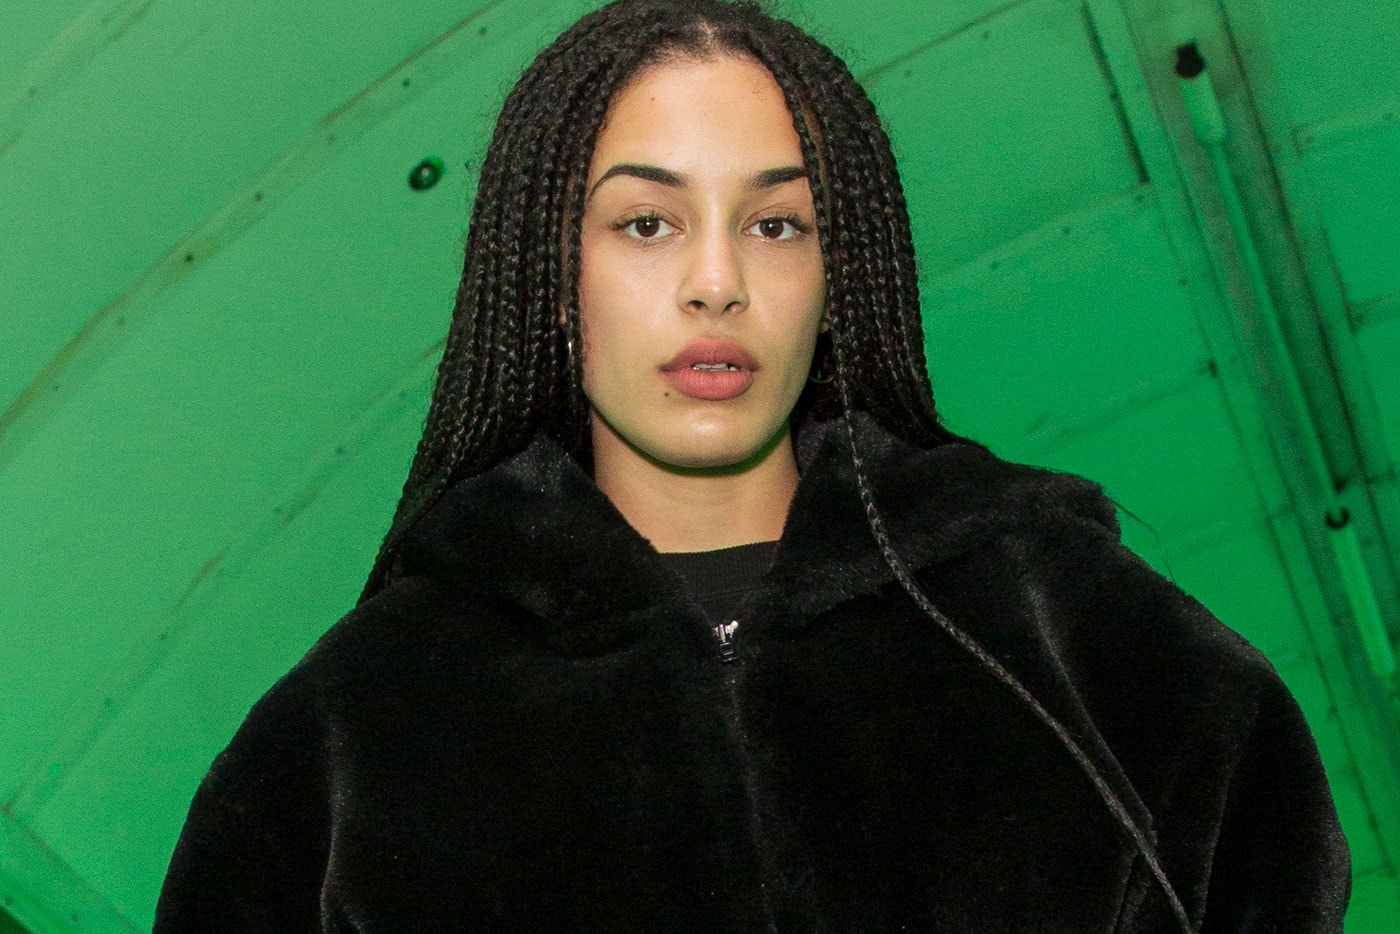 Jorja Smith Joins Cadenza and Dre Island for New "People" Video